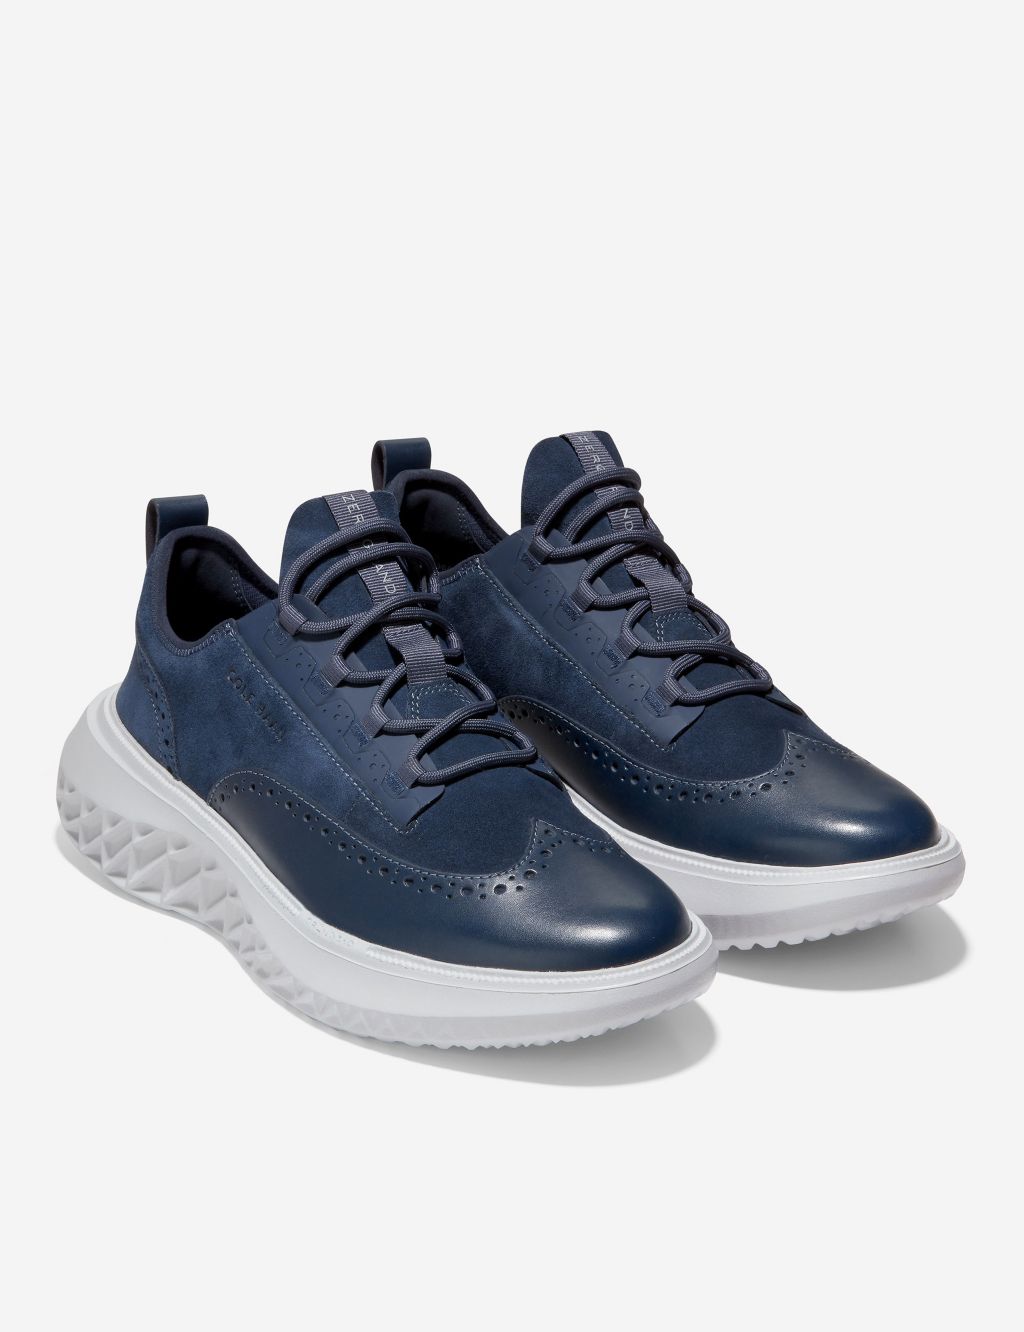 Zerogrand Leather Lace Up Trainers image 2